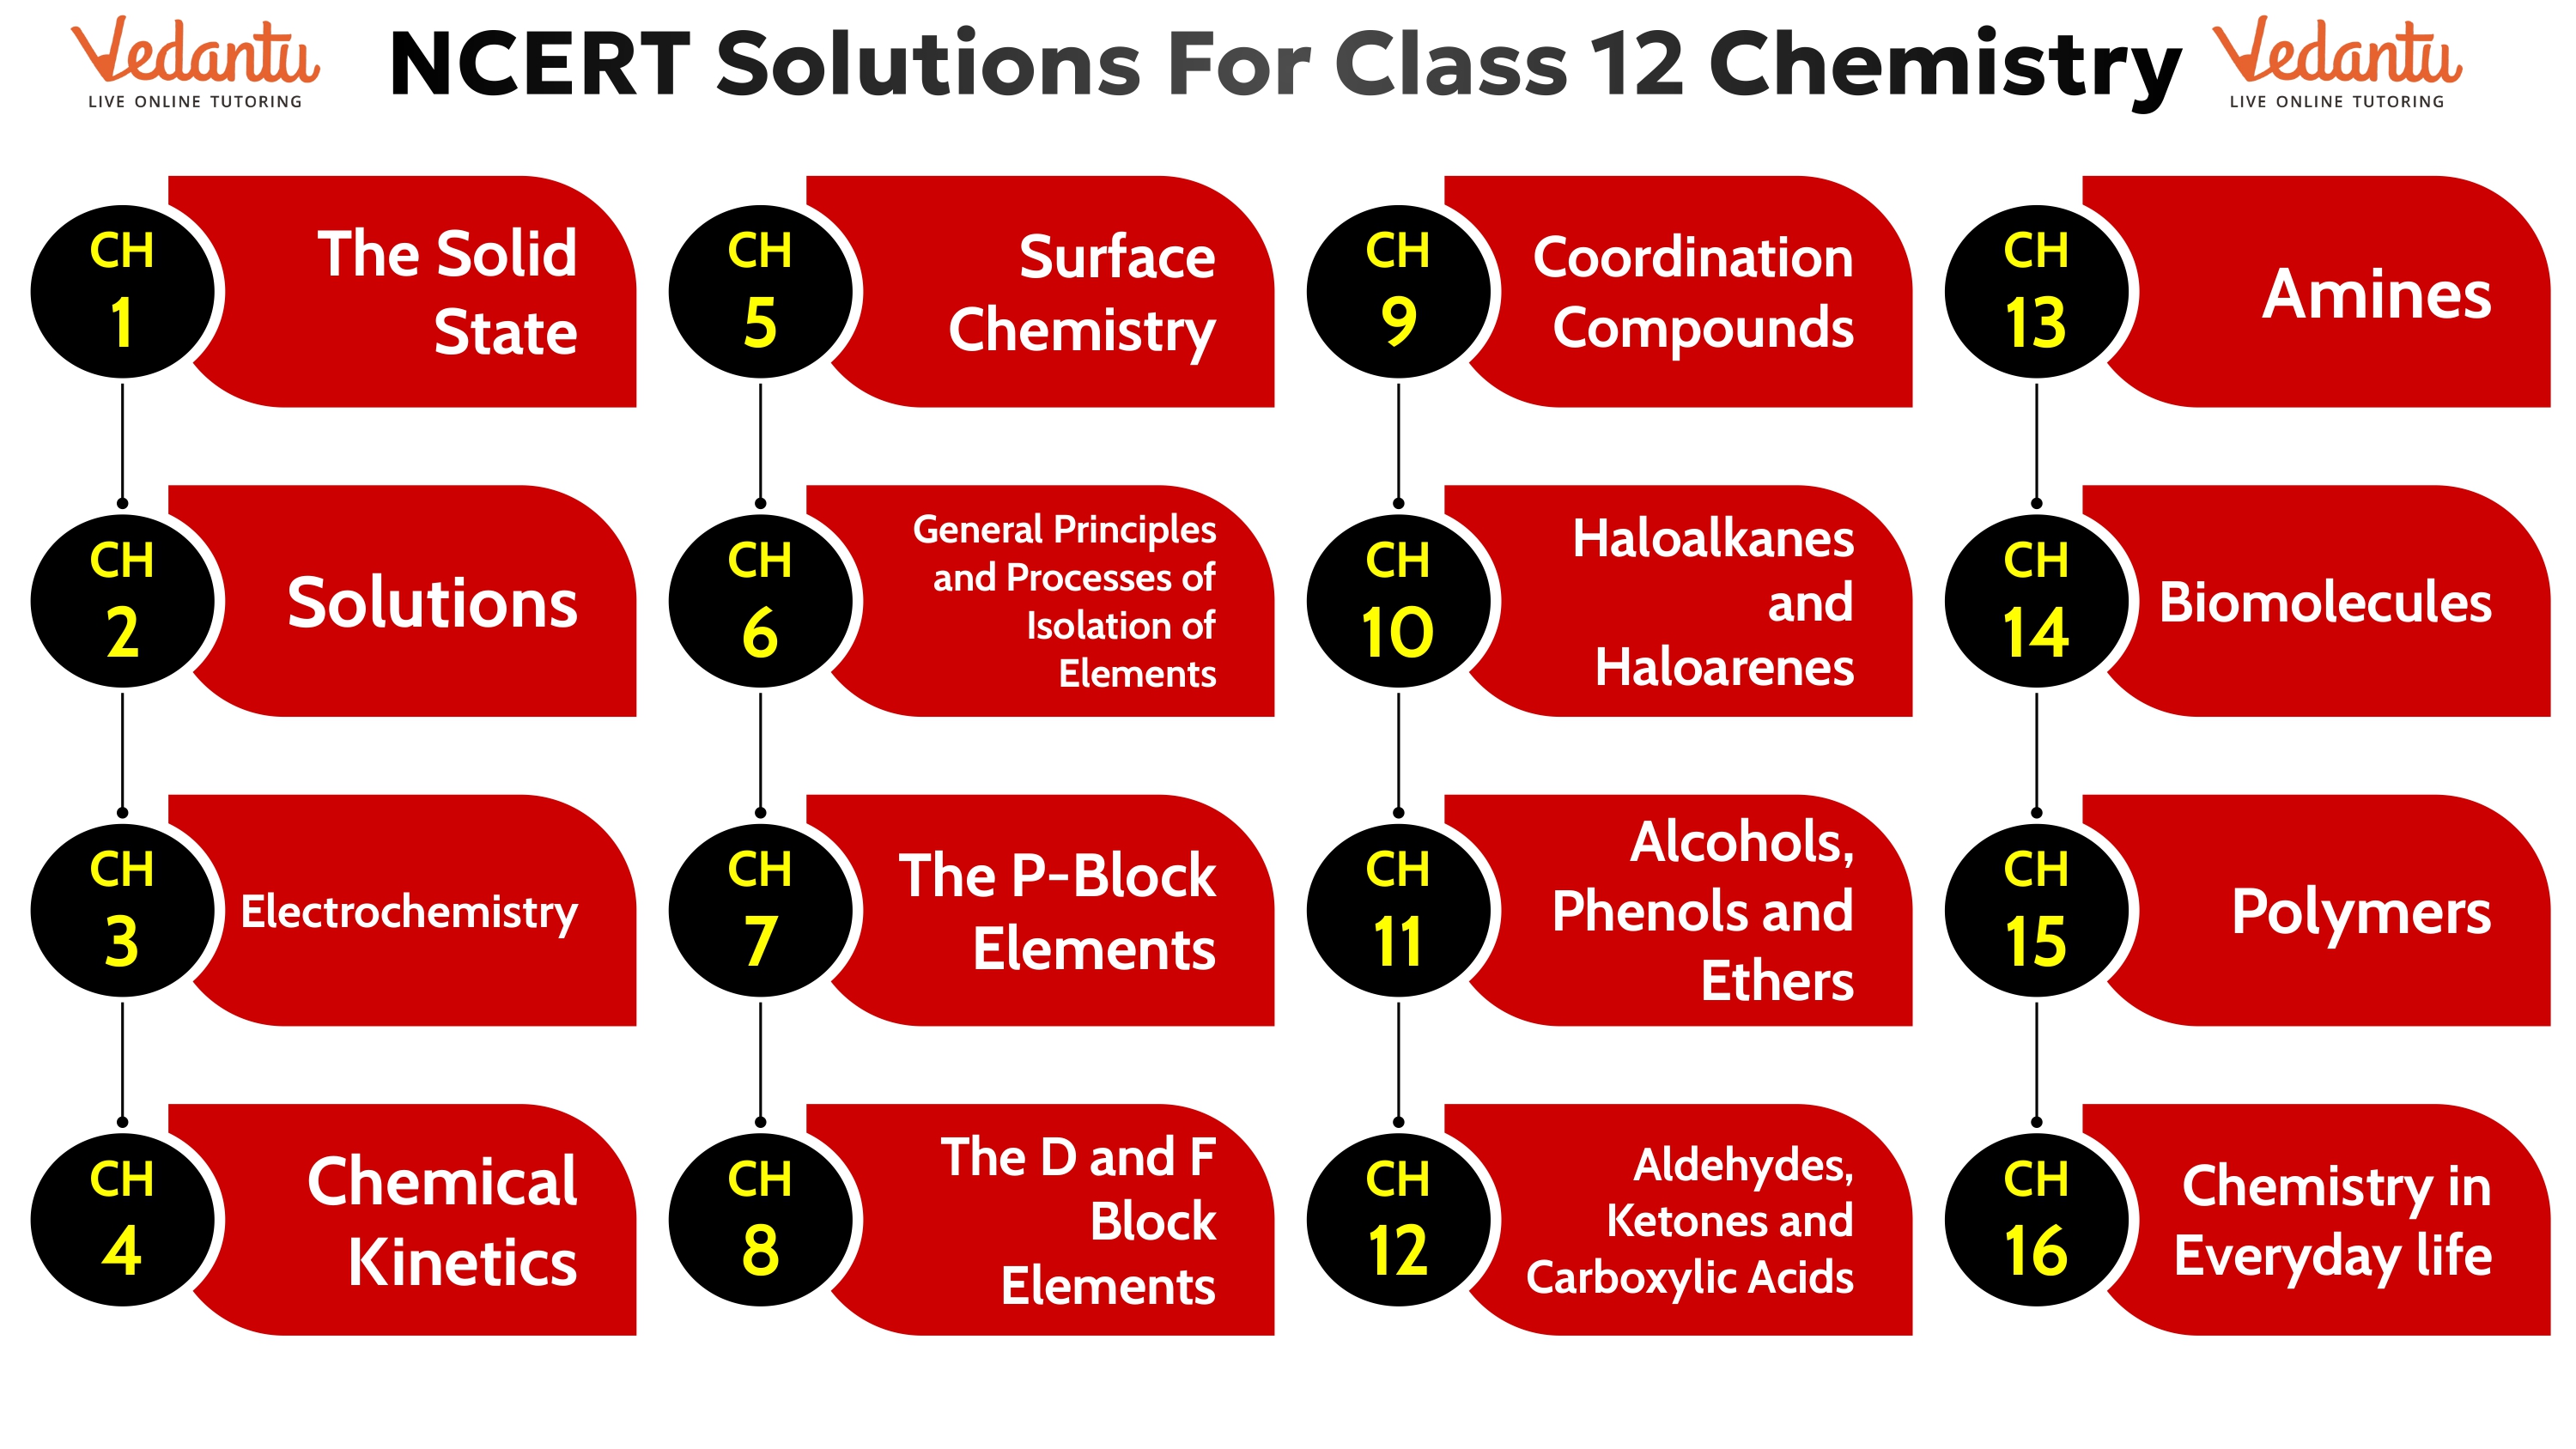 NCERT Solutions for Class 12 Chemistry Chapter-wise Overview